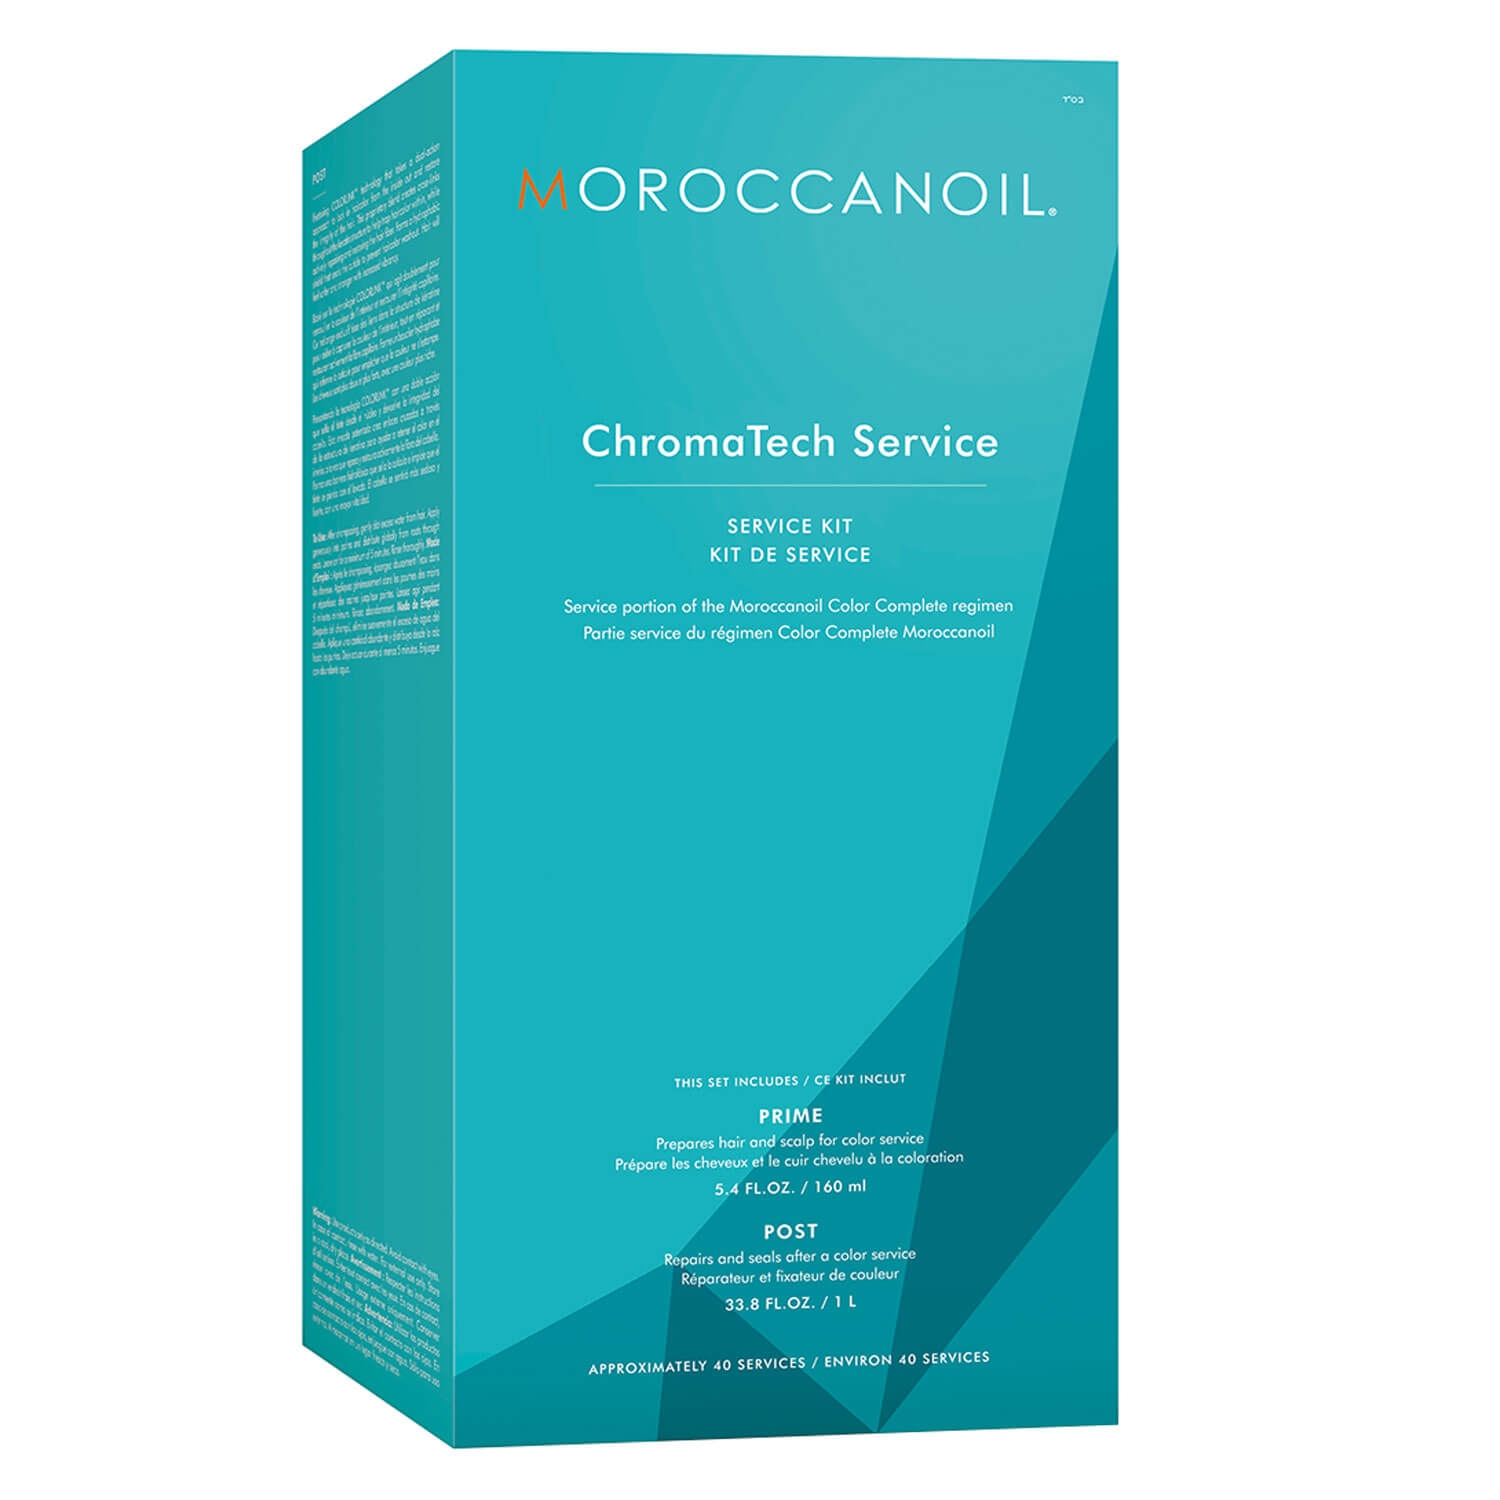 Product image from Moroccanoil - Chromatech Service Kit